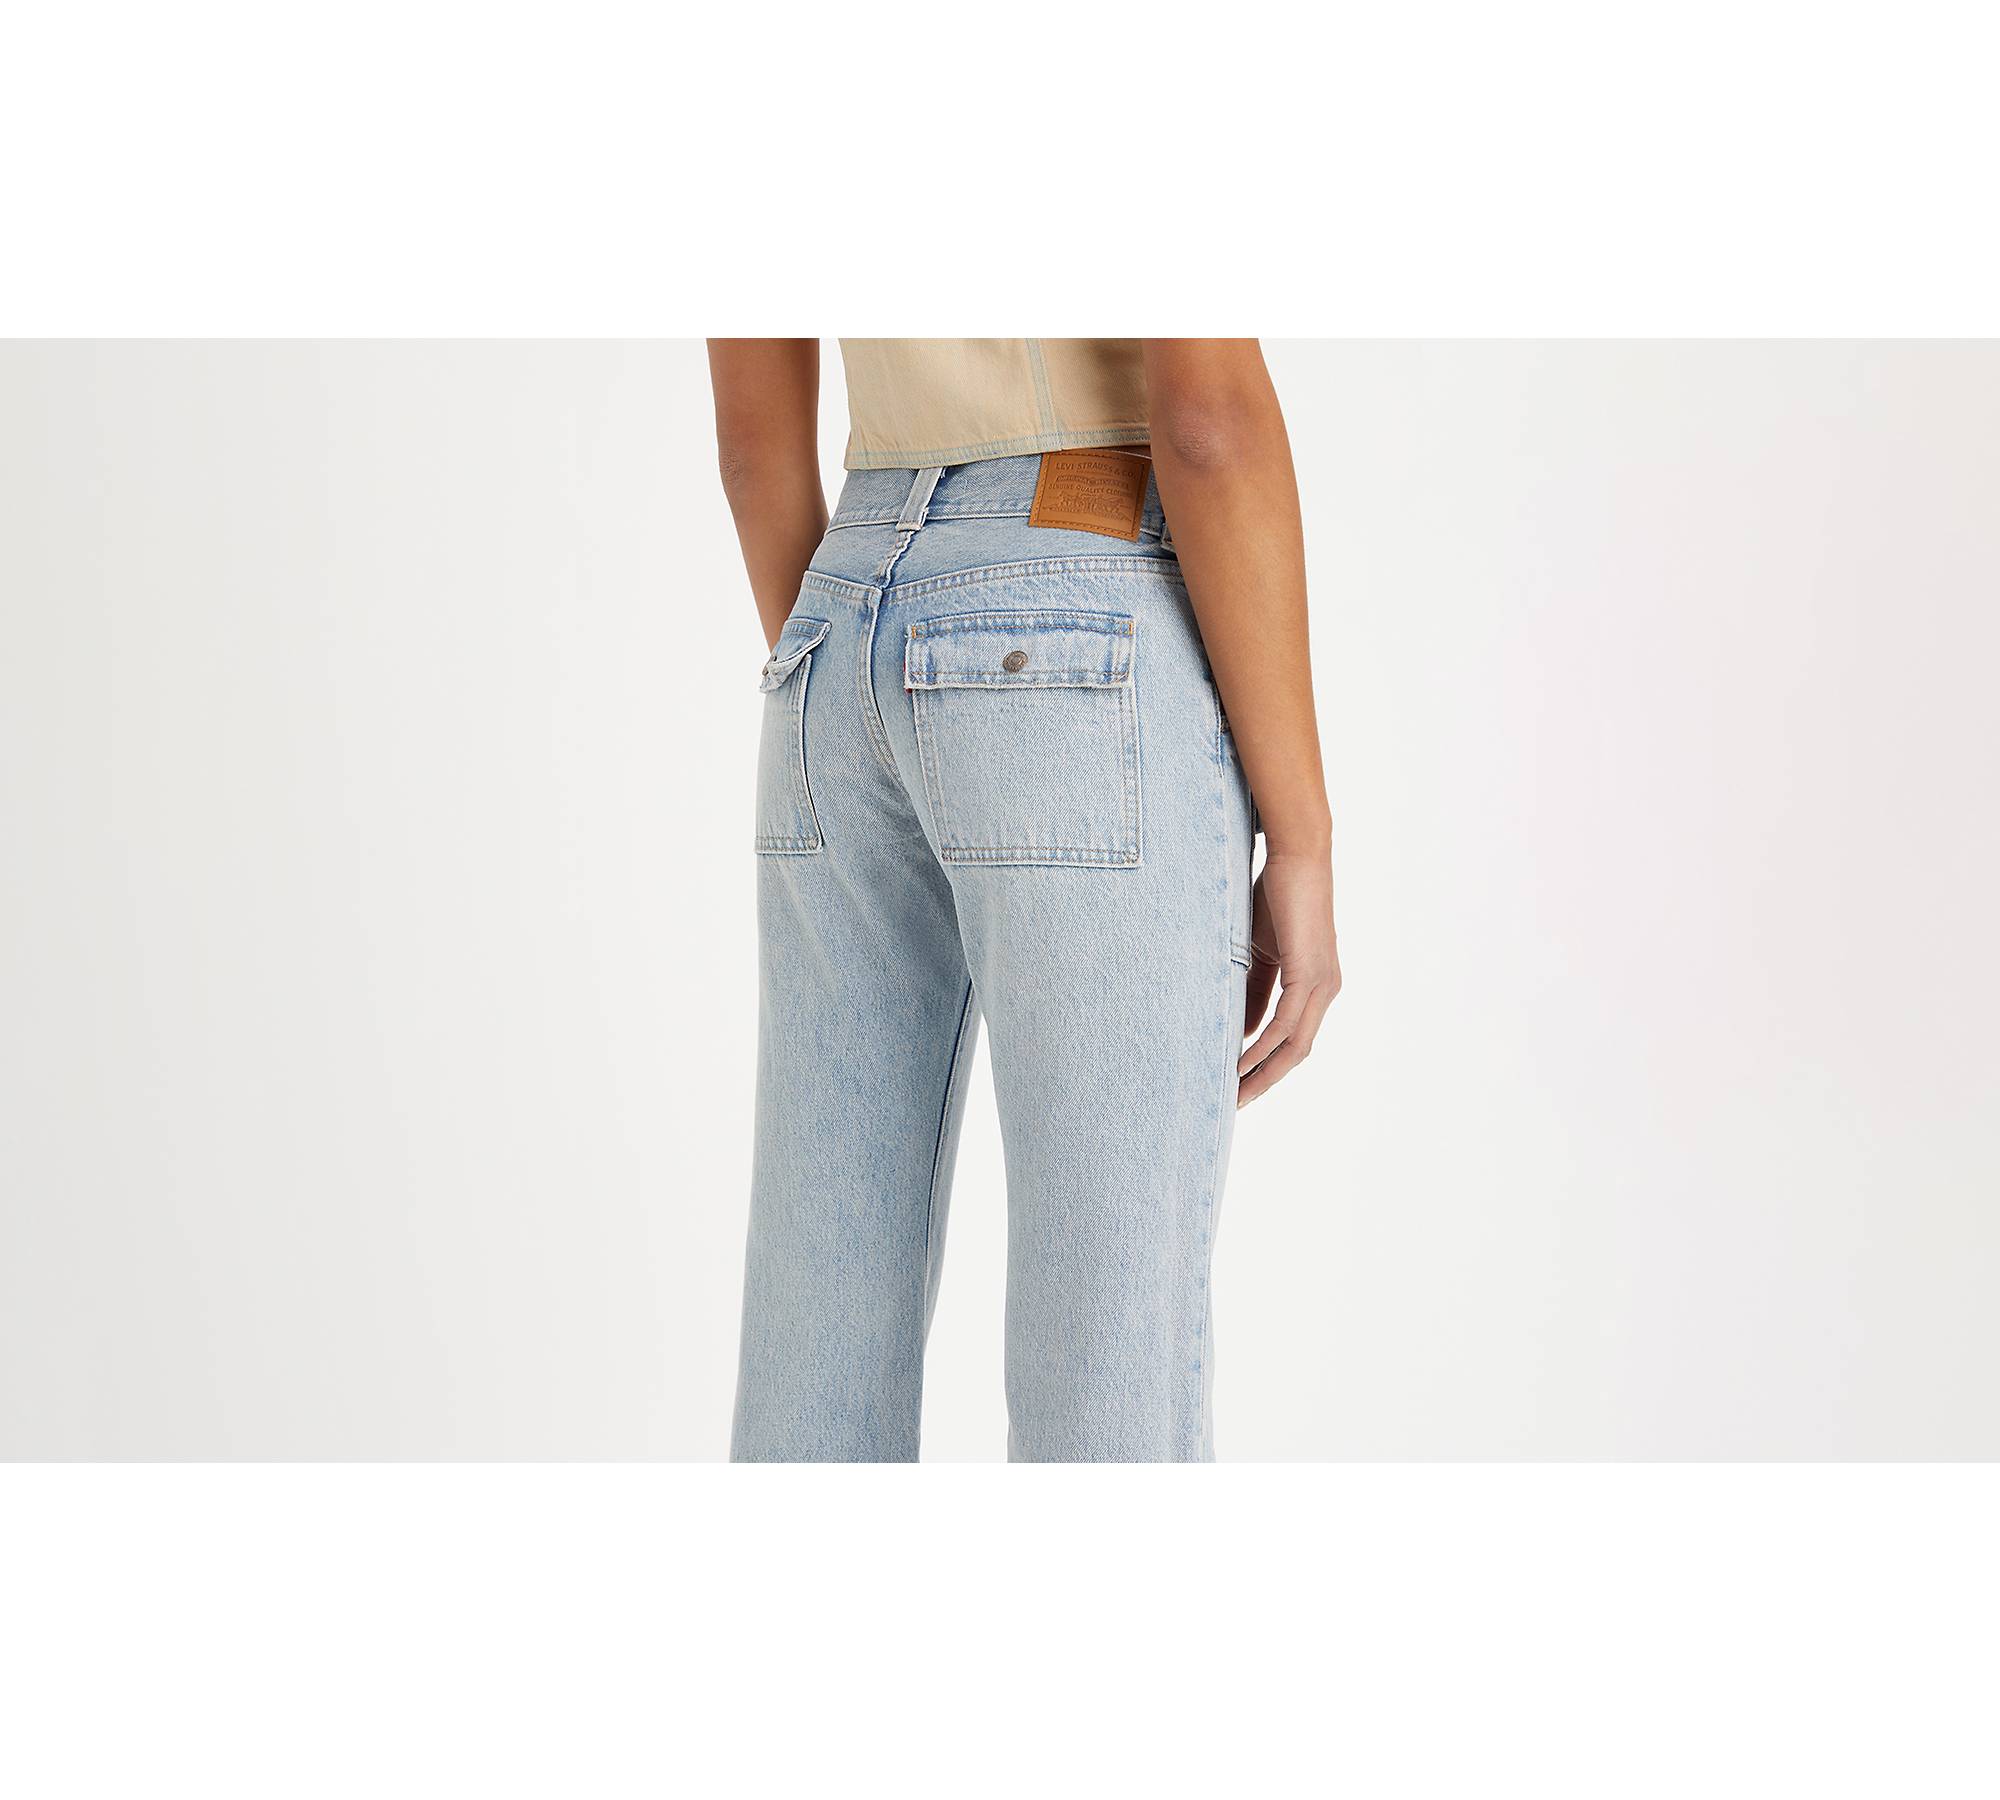 Middy Outback Bootcut Women's Jeans - Light Wash | Levi's® US